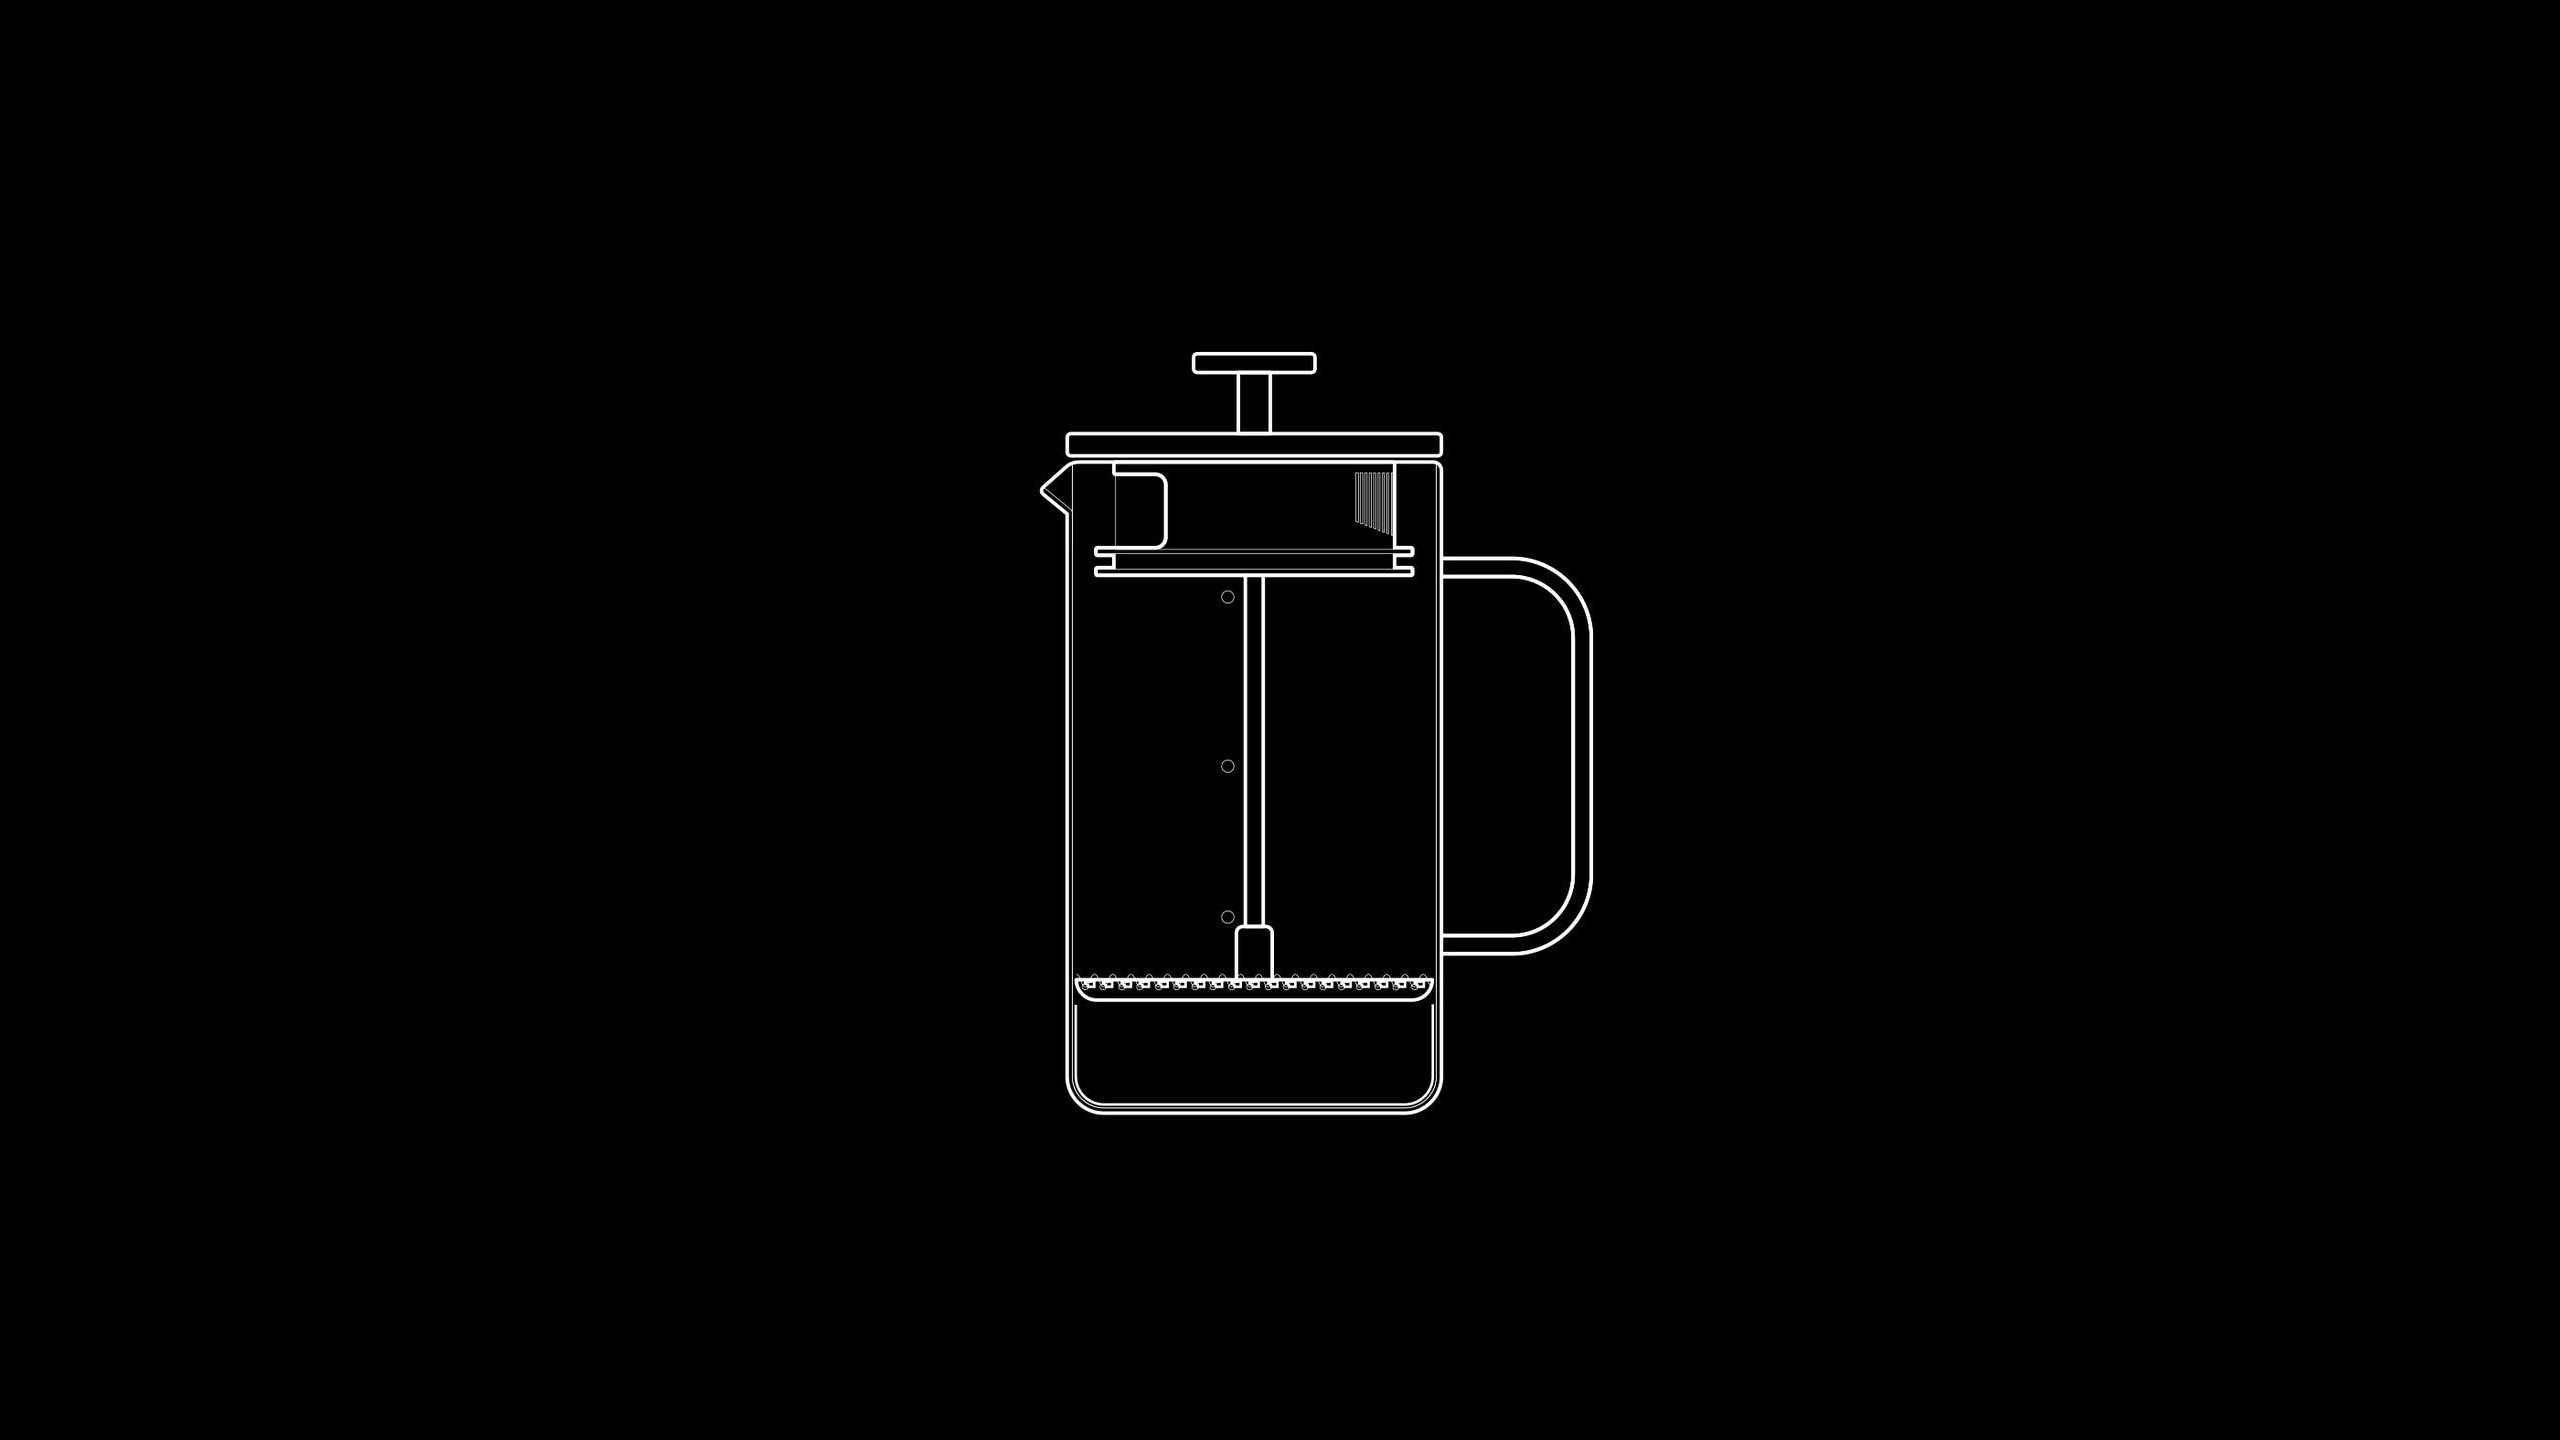 Easy to brew and super consistent, the French Press is very reliable. It's classic and well-engineered design hasn’t changed much since its invention in 1929, and it’s perfect for making multiple cups of heavy-bodied coffee in 4 minutes.